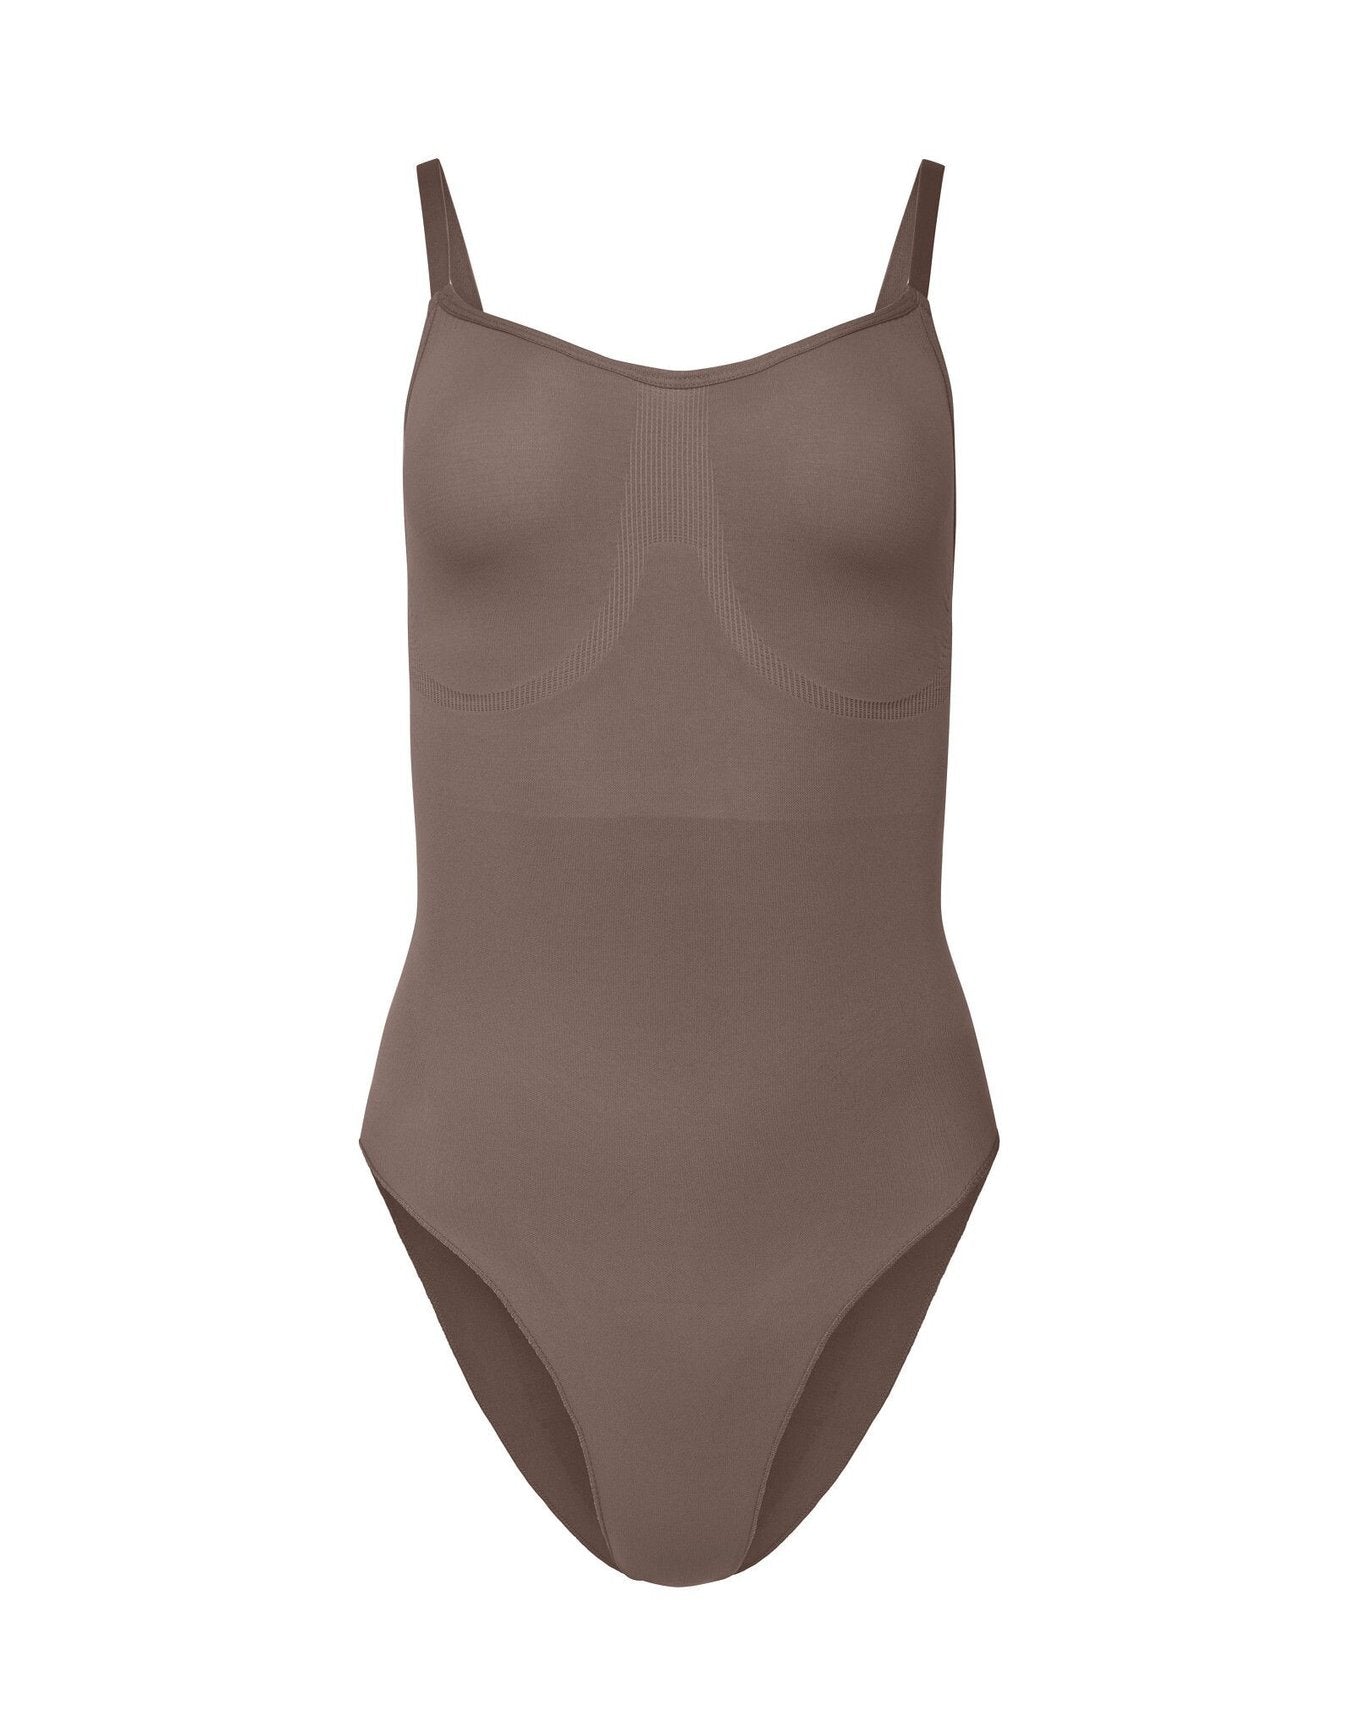 nueskin Cady High-Compression Cheeky Bodysuit in color Deep Taupe and shape bodysuit